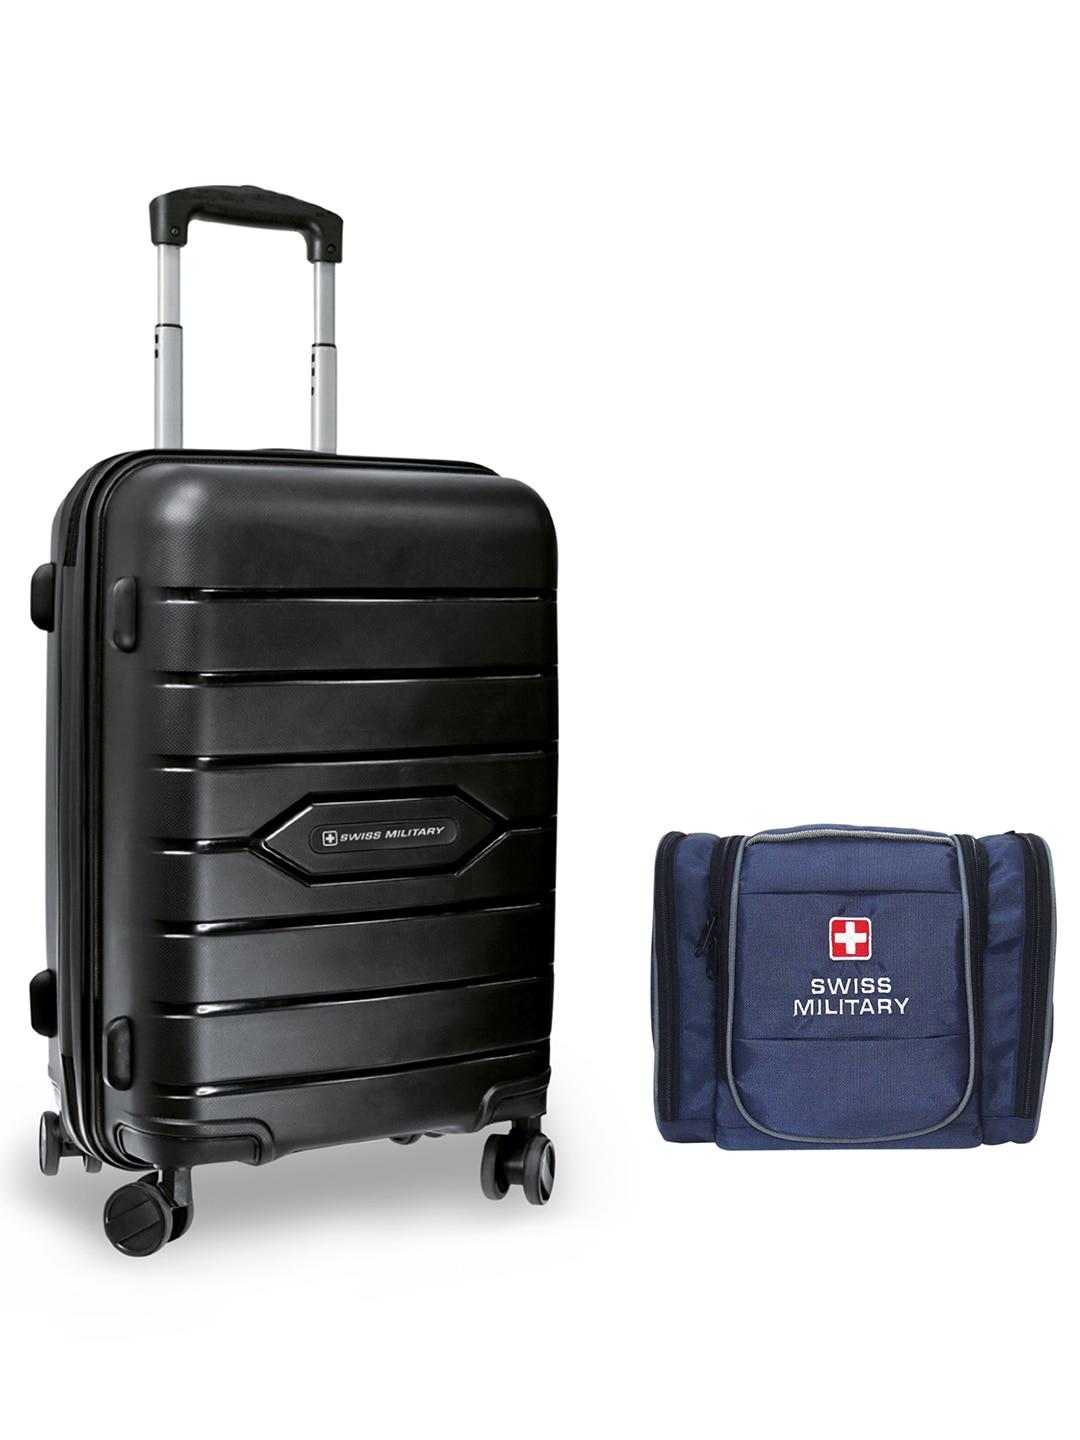 swiss military black textured cabin size luggage and toiletry bag combo